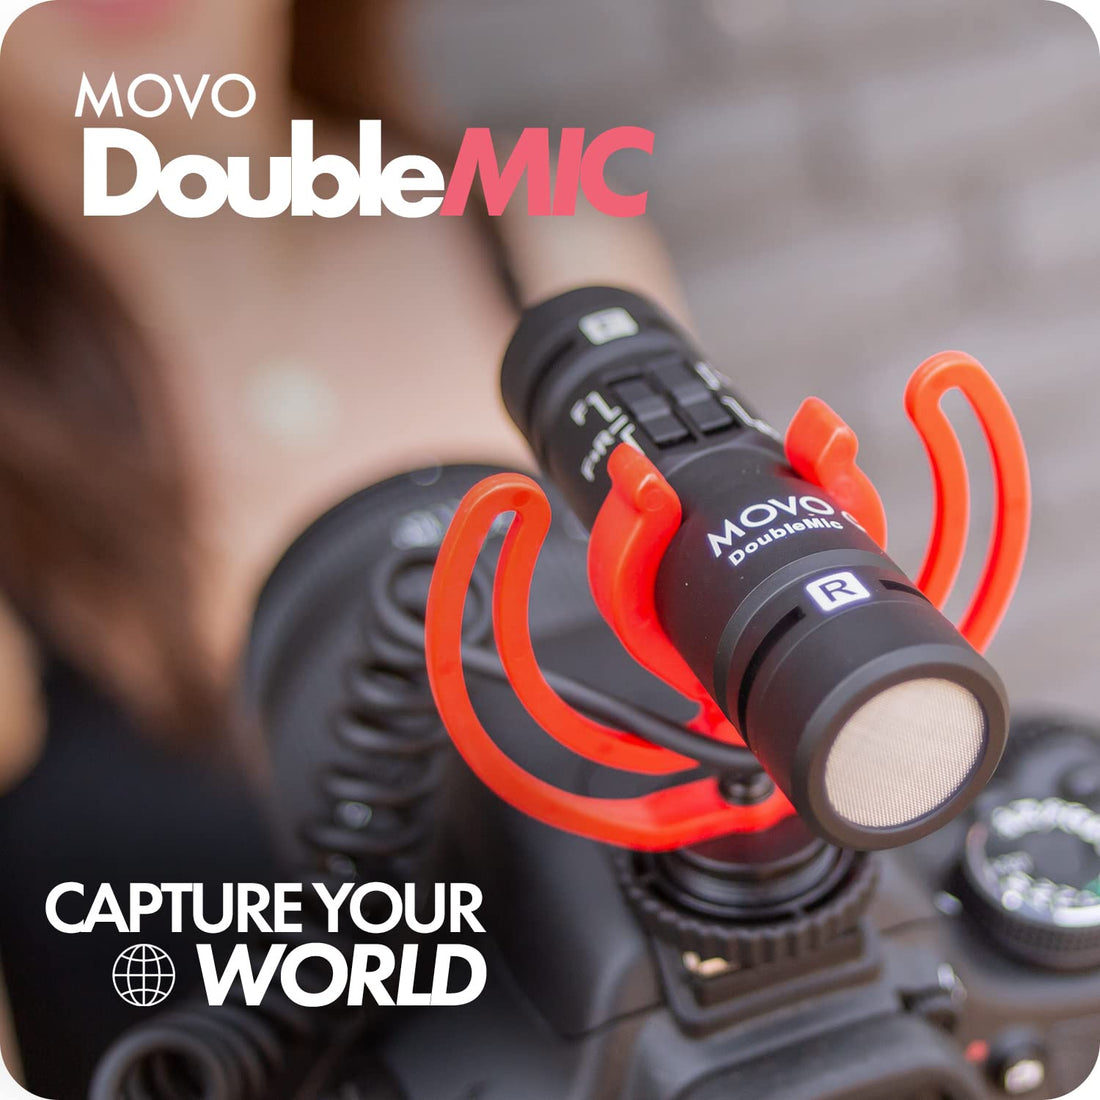 Movo DoubleMic V2 Two-Sided Supercardioid Video Shotgun Microphone for iPhone, Android, Smartphones or DSLR Camera - Dual Capsule External Mic with Improved Wind Protection - Latest Version